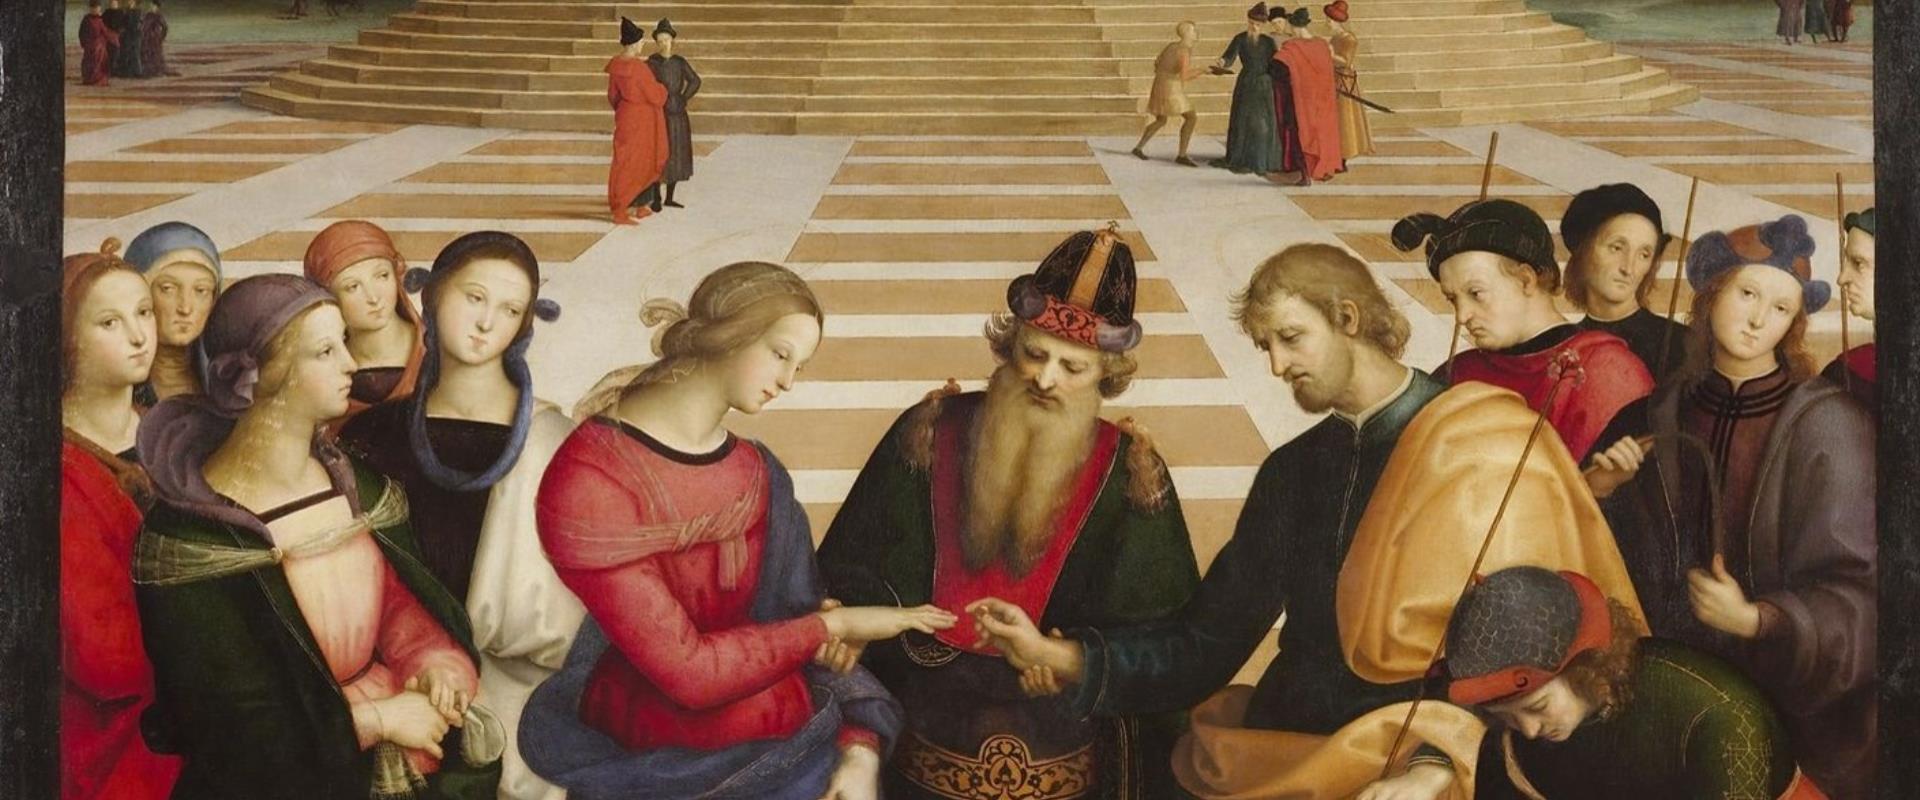 Discover one of the masterpieces of the young Raphael exhibited at the Pinacoteca di Brera in Milan and stay at the Best Western Hotel City in the heart of the city.